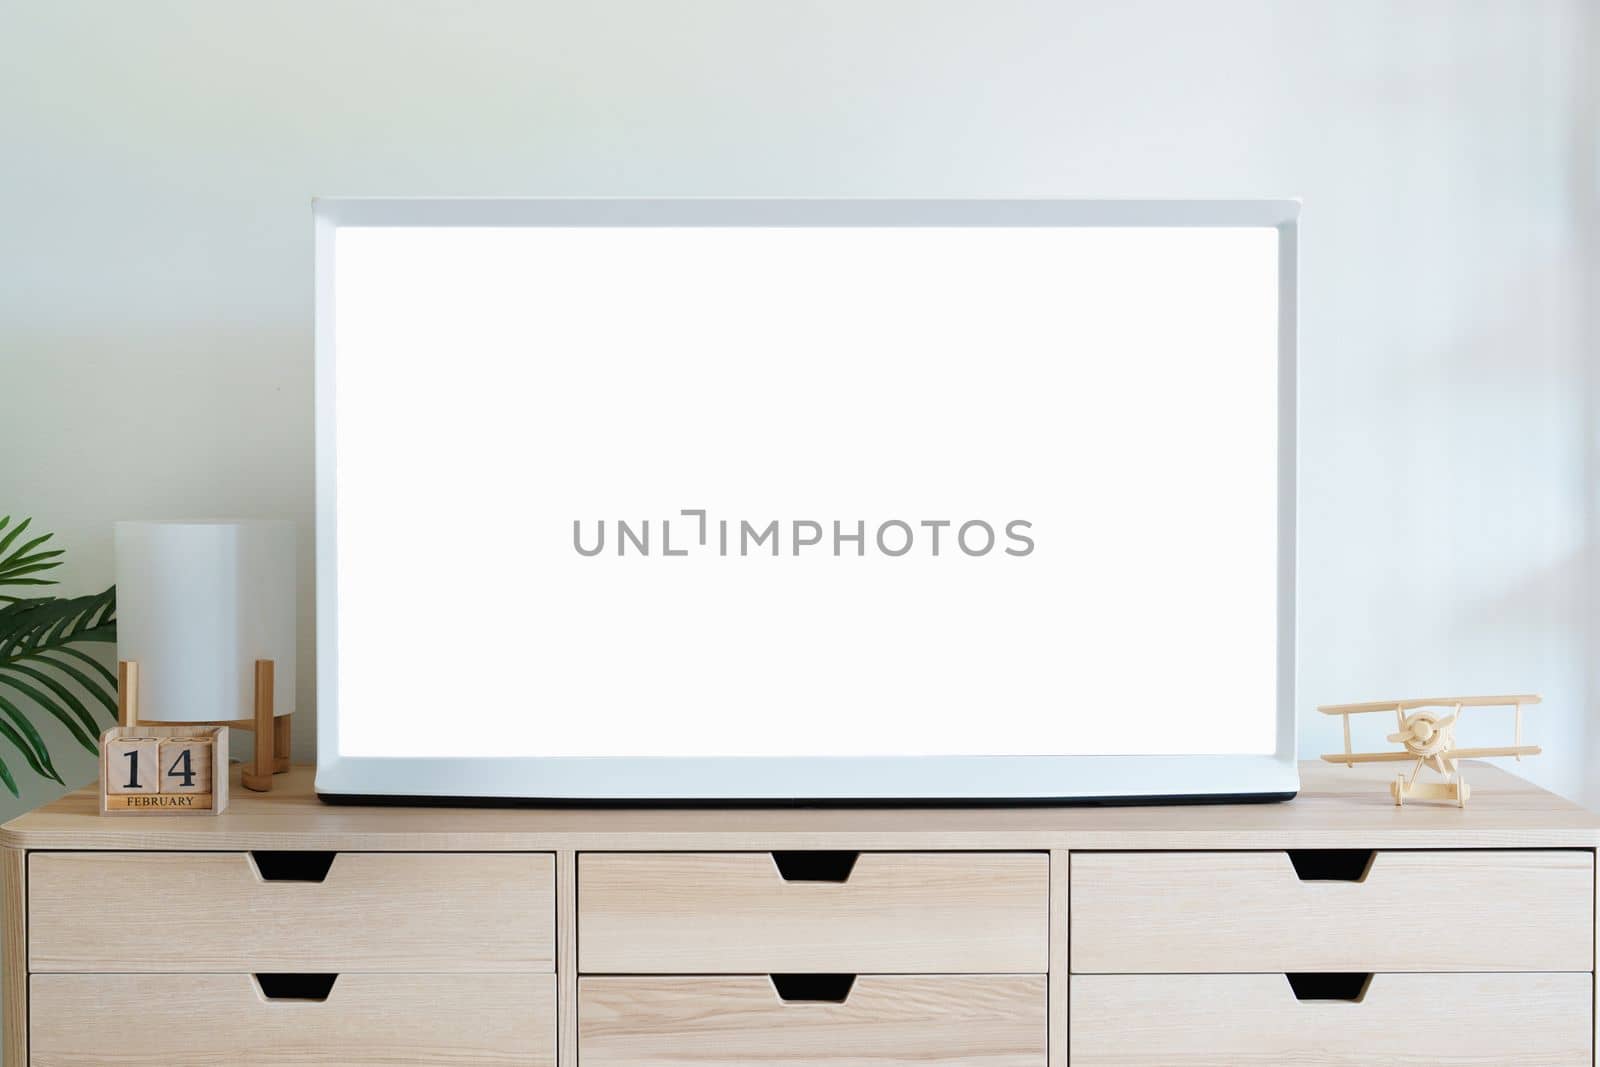 White screen TV that can bring messages or advertising media to put by Manastrong